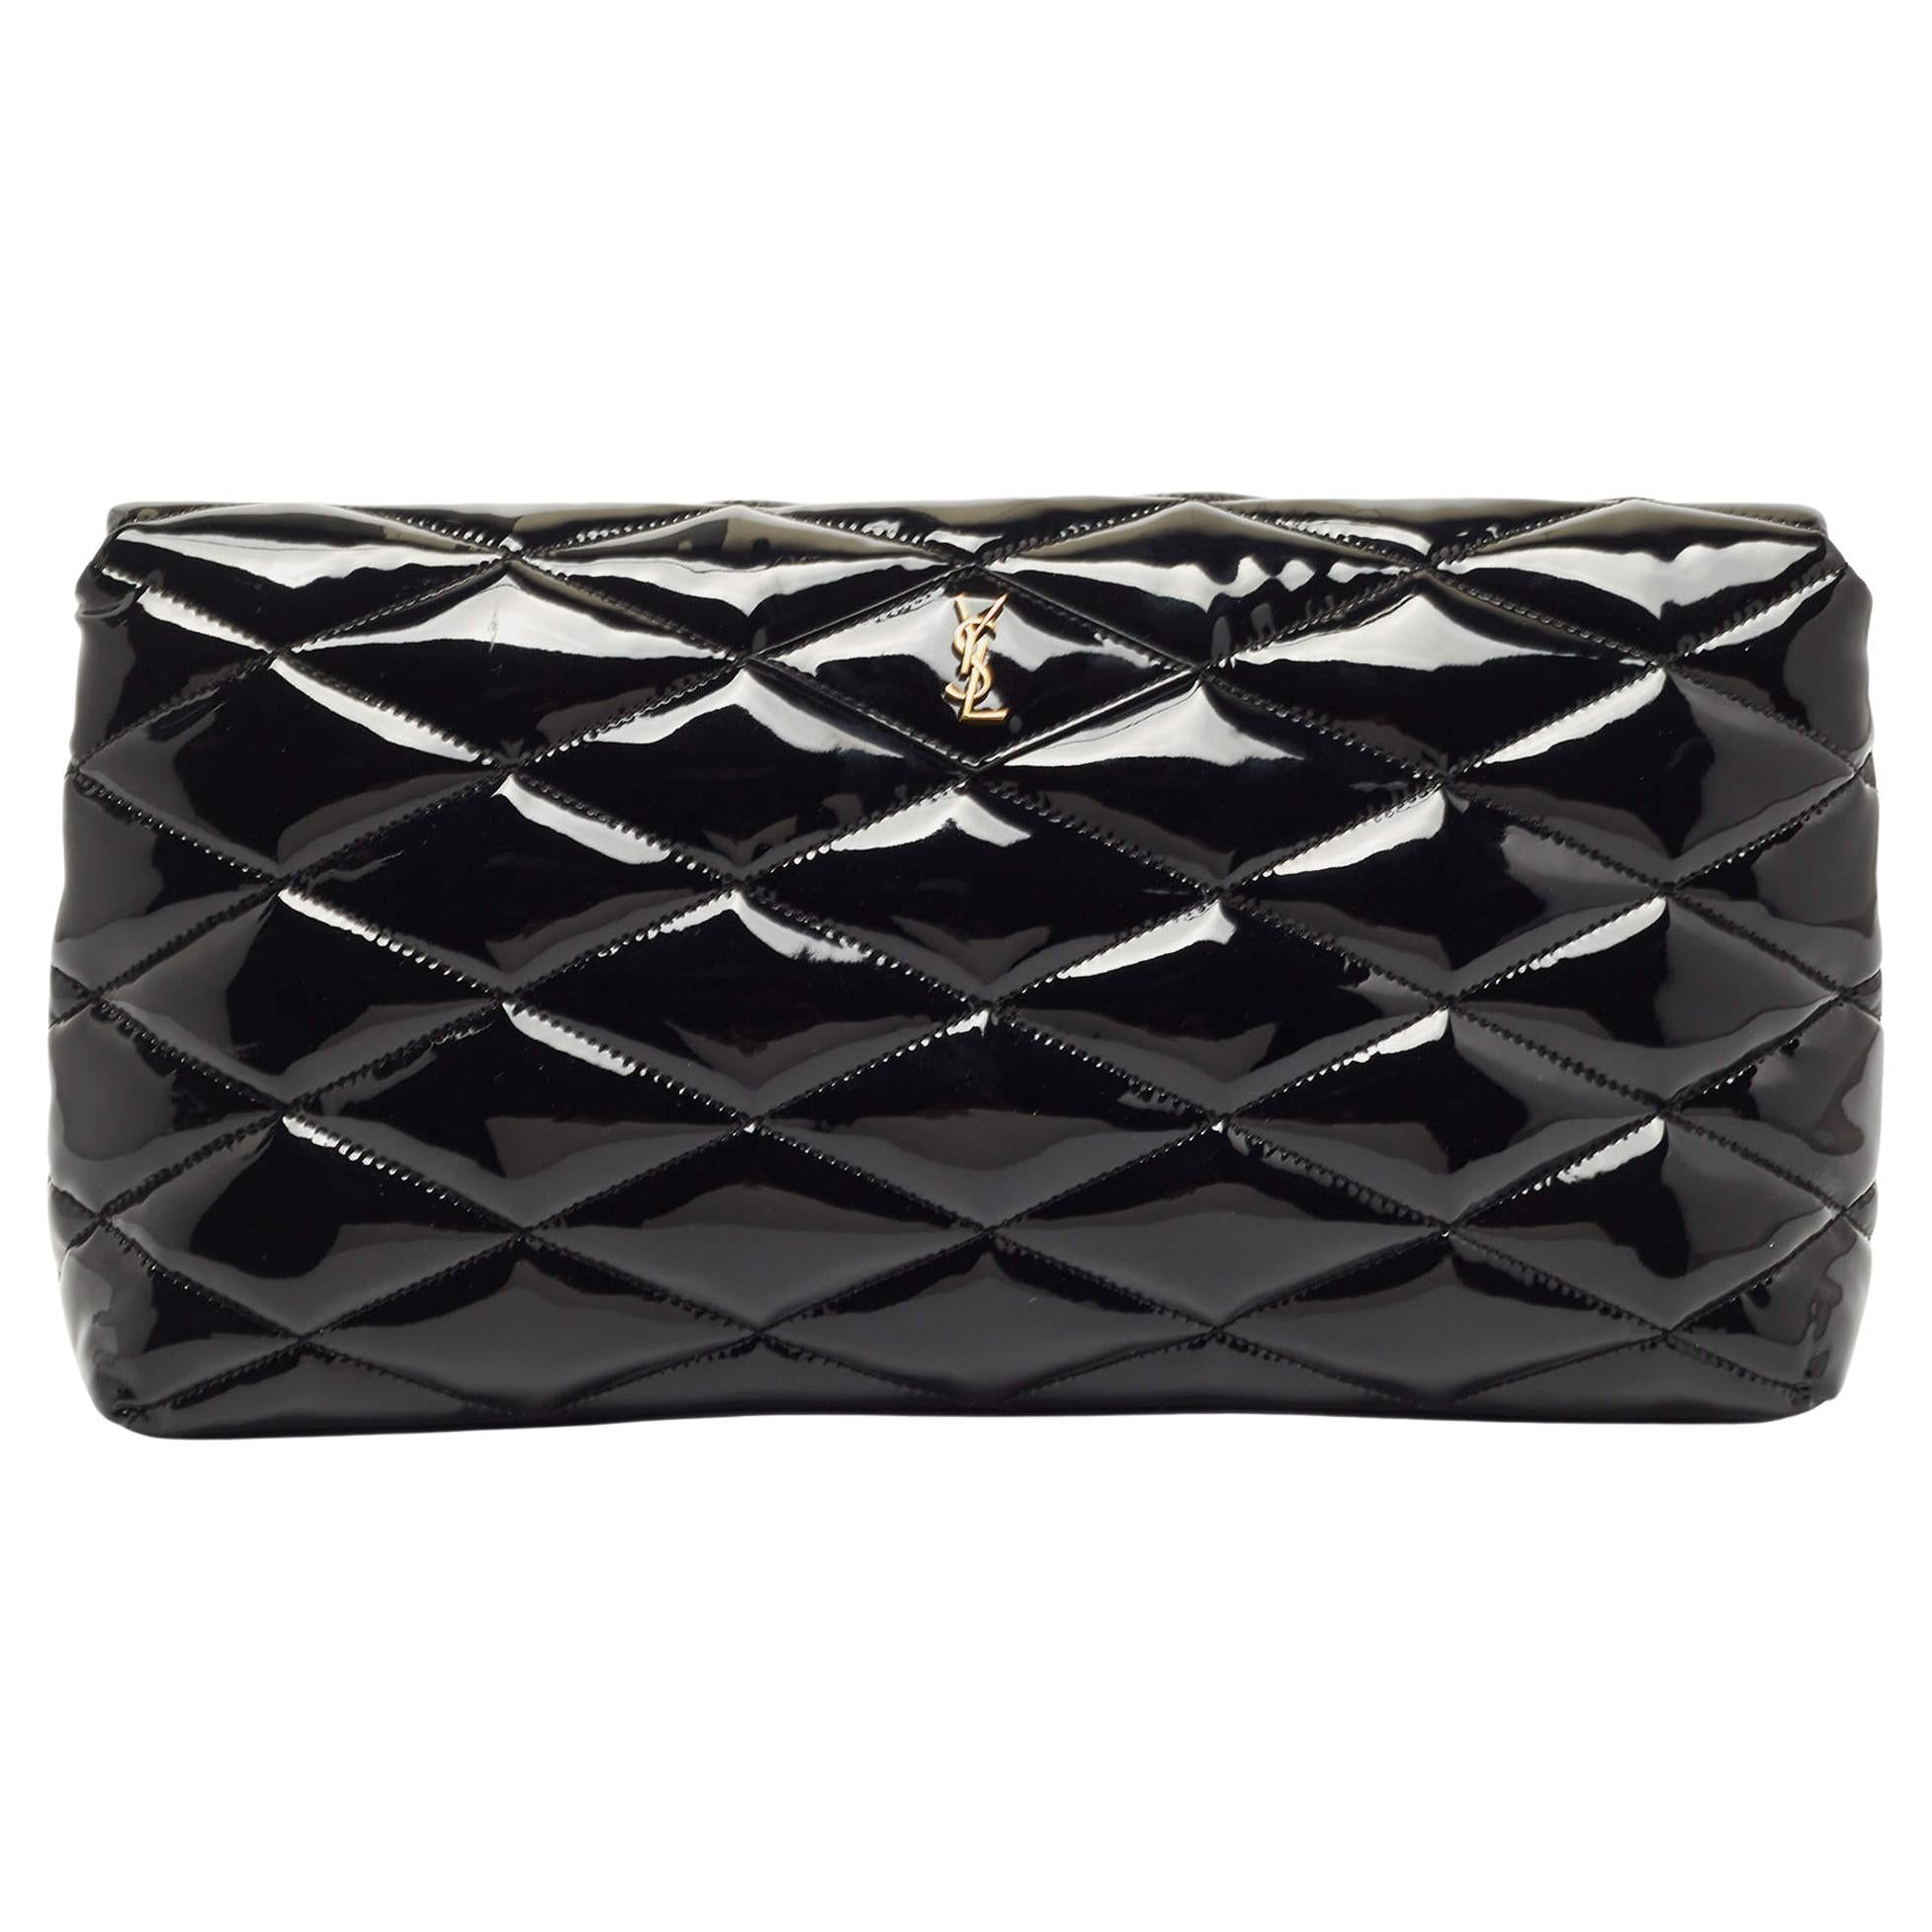 Saint Laurent Black Quilted Patent Leather Sade Puffer Envelope Clutch